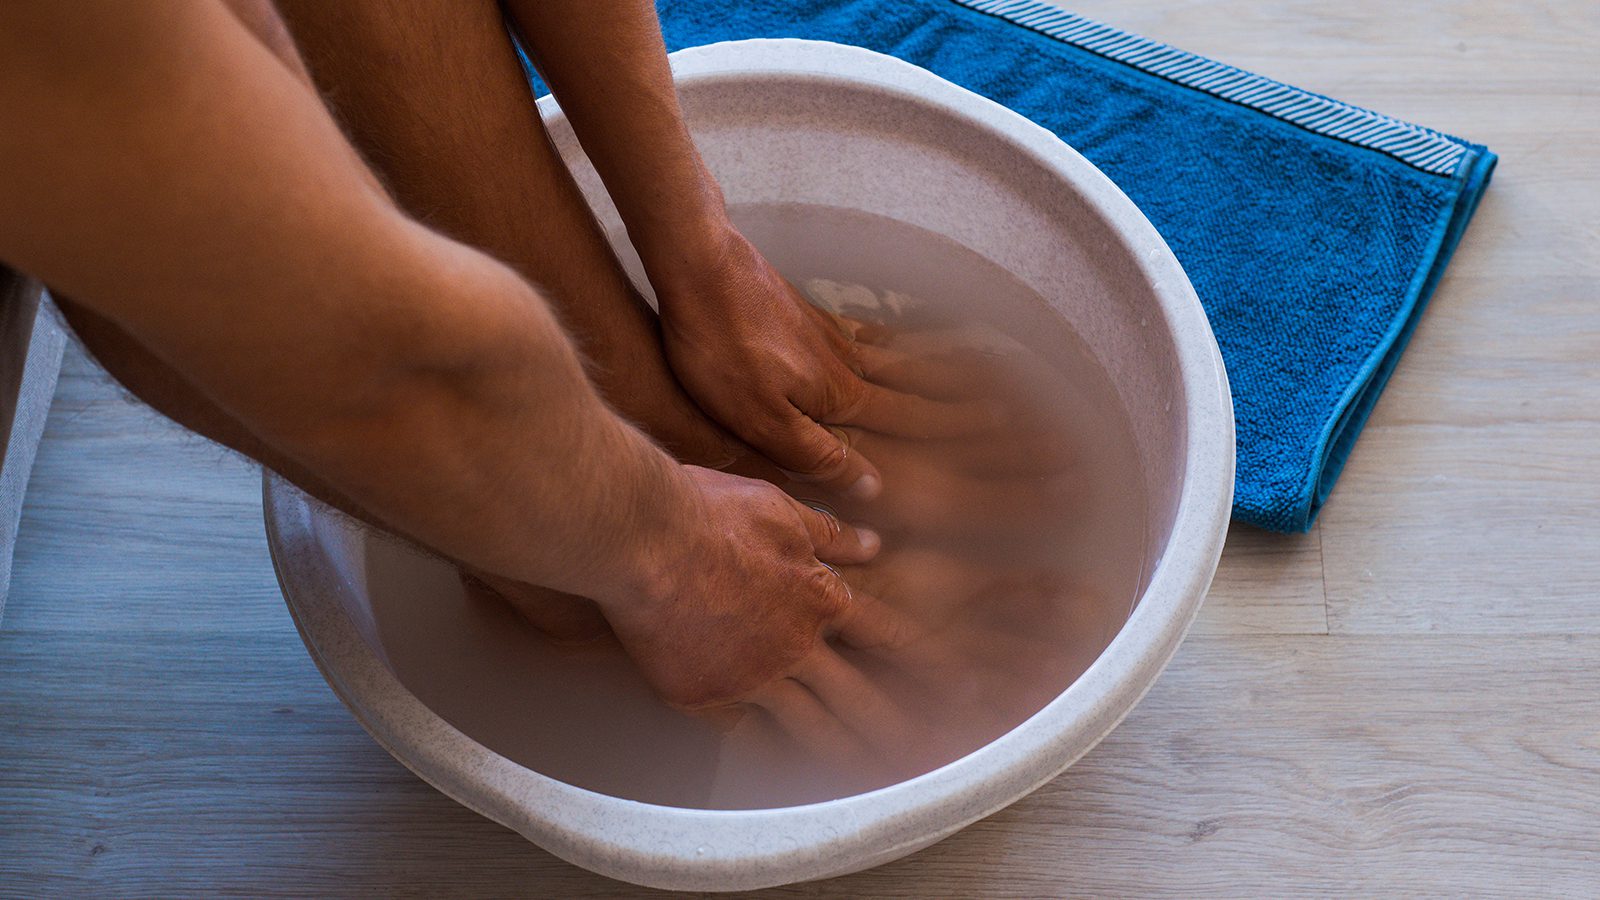 10 Signs You Need Foot Detox (And How to Do It)